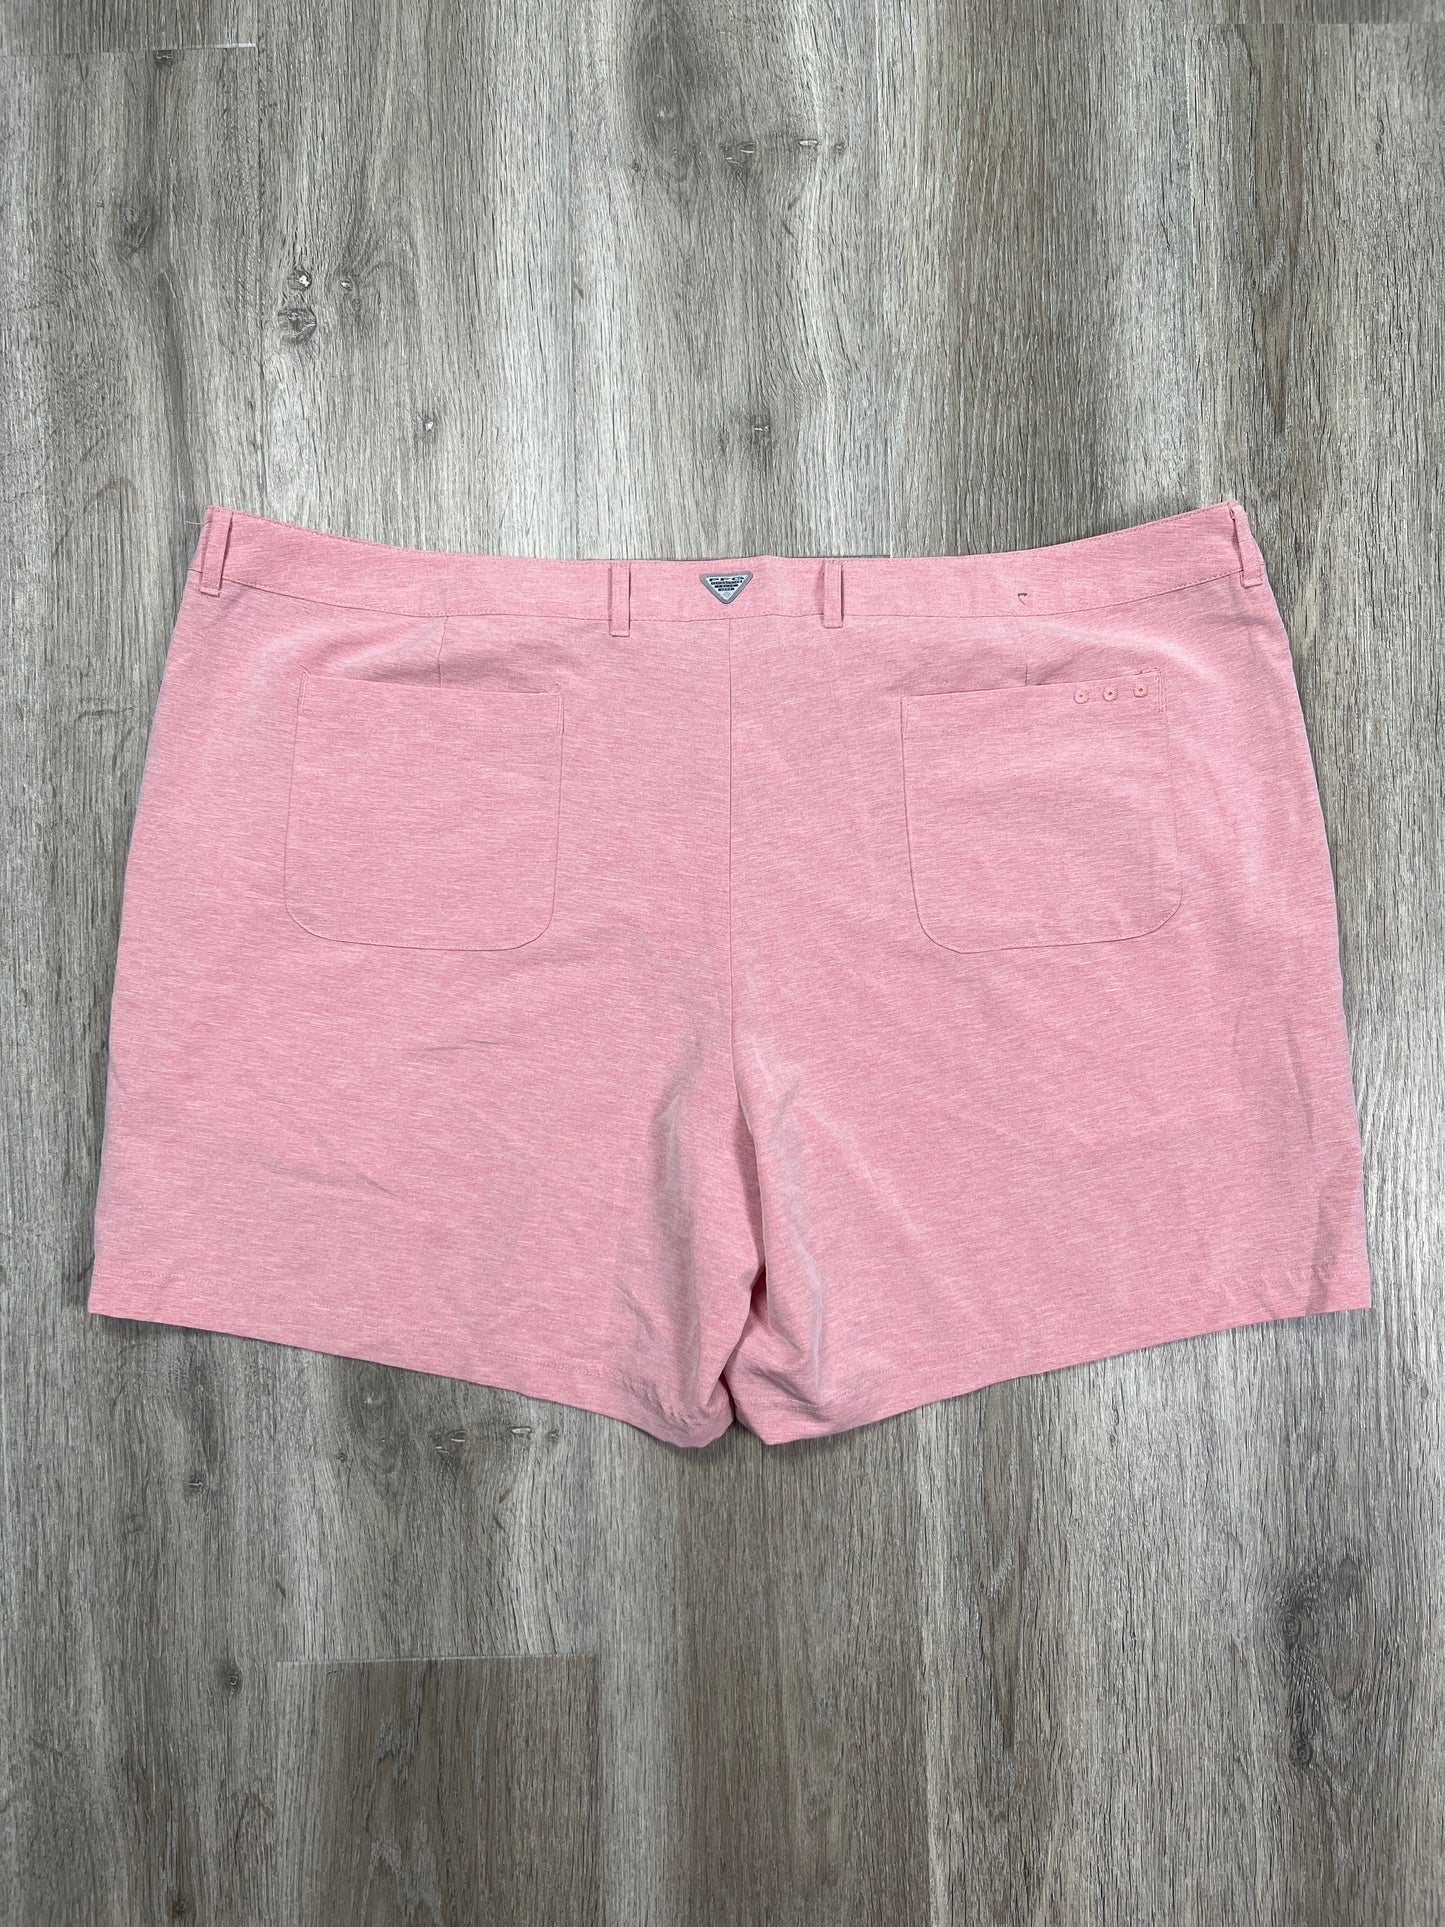 Pink Athletic Shorts Columbia, Size 3x